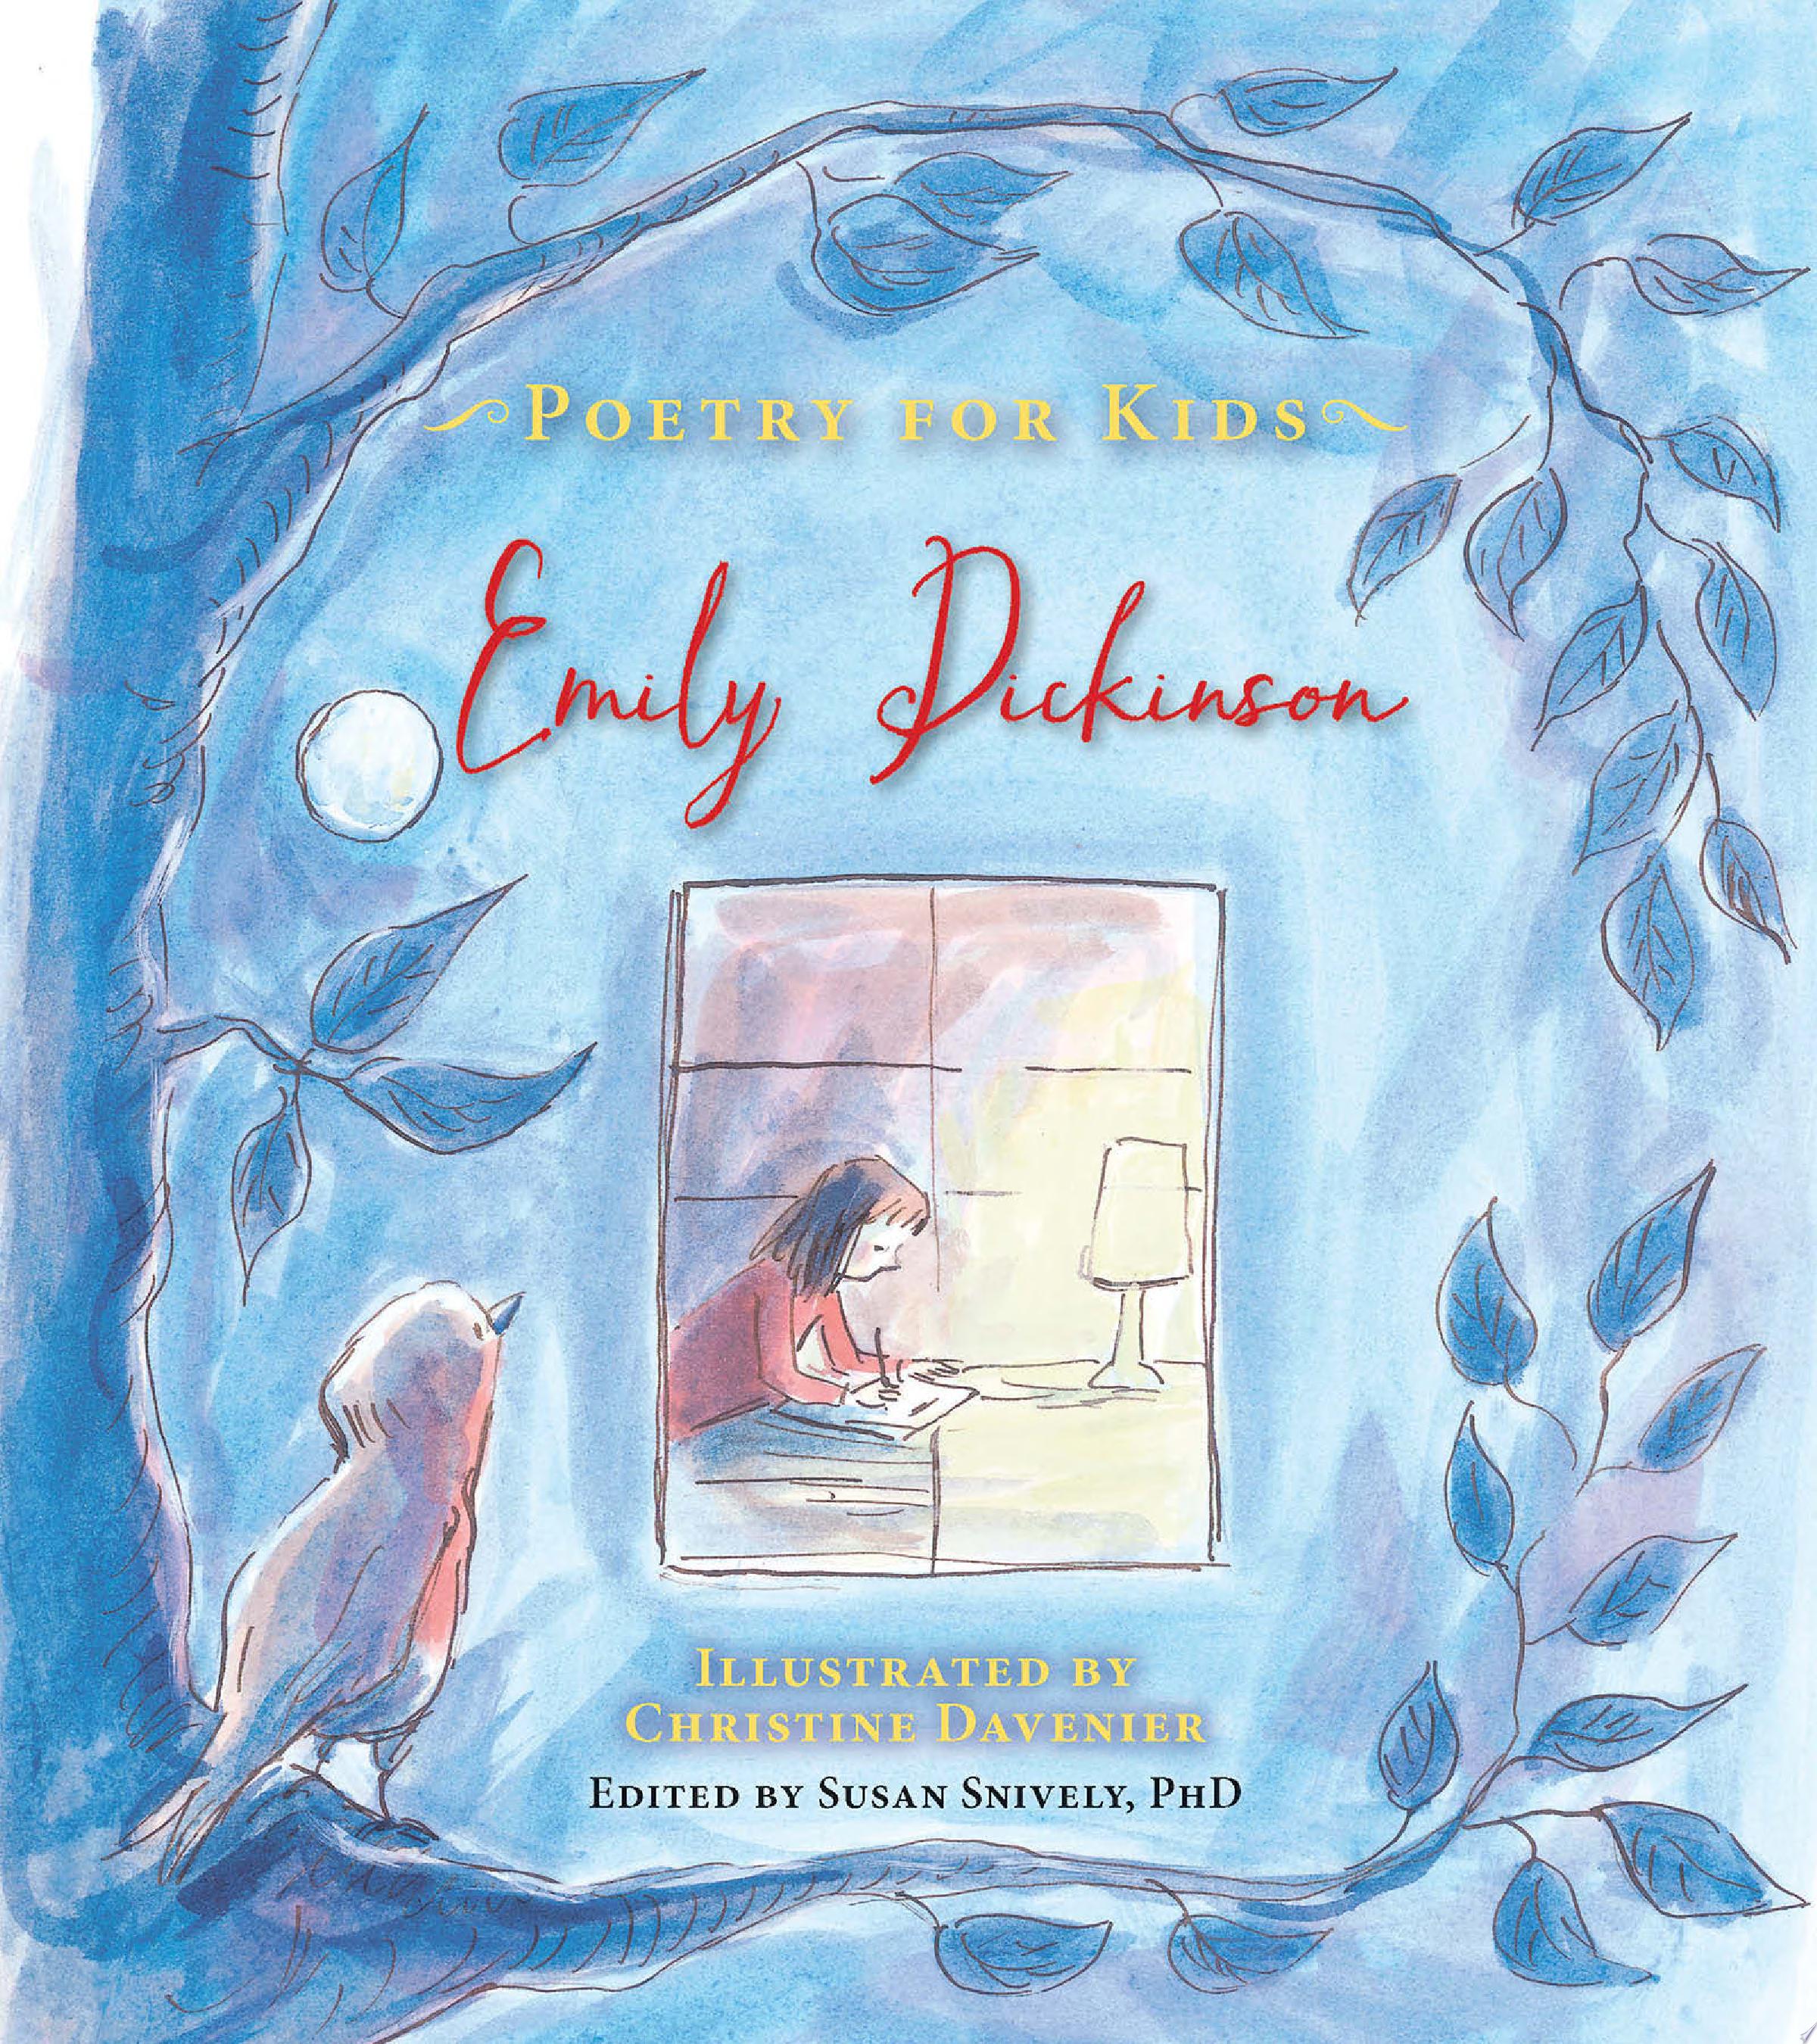 Image for "Poetry for Kids: Emily Dickinson"